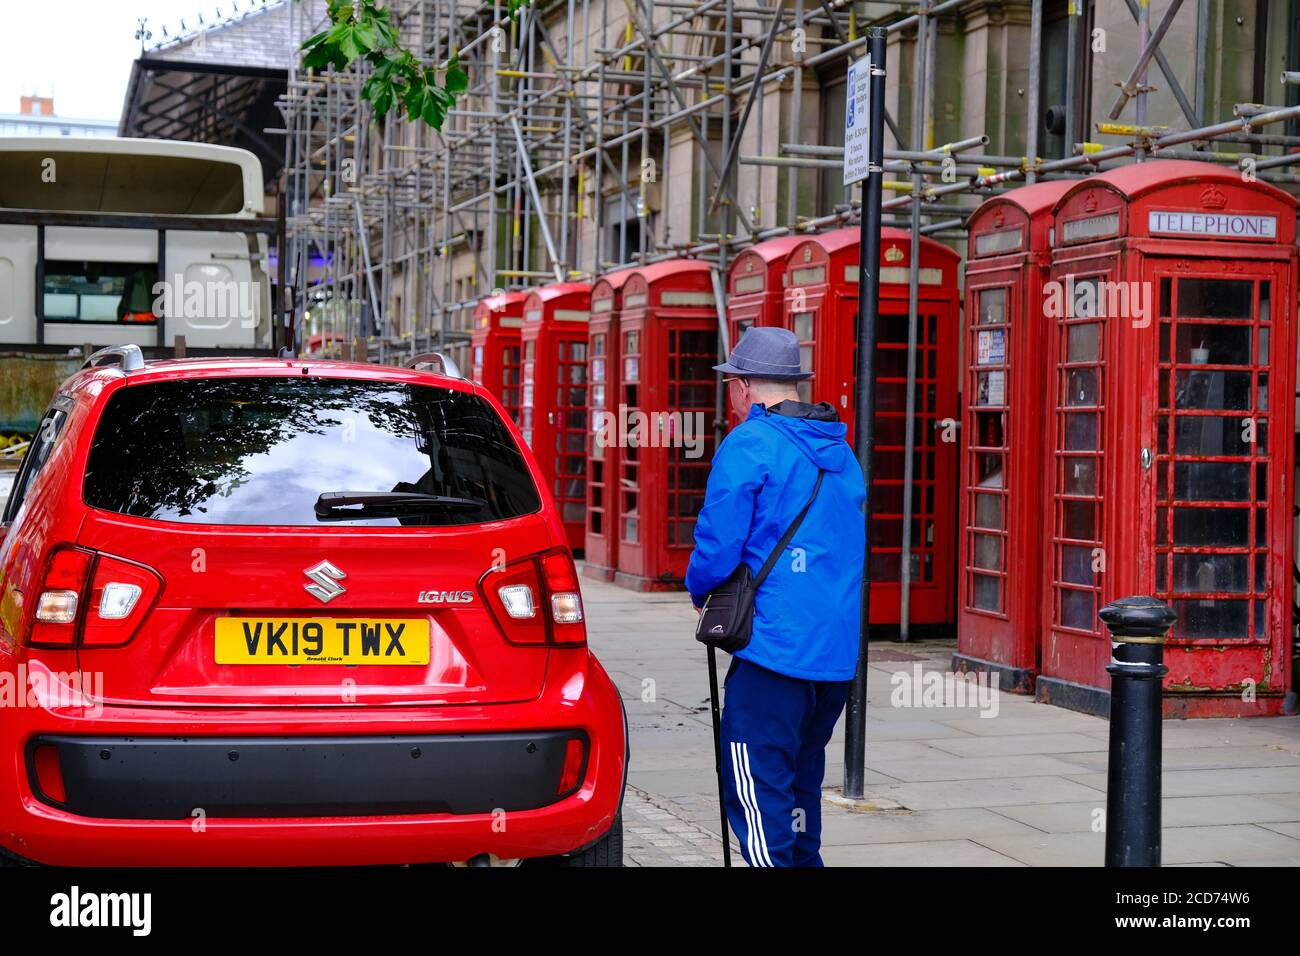 Red car in front of a row of eight traditional red telephone boxes in Presto's city centre. Stock Photo